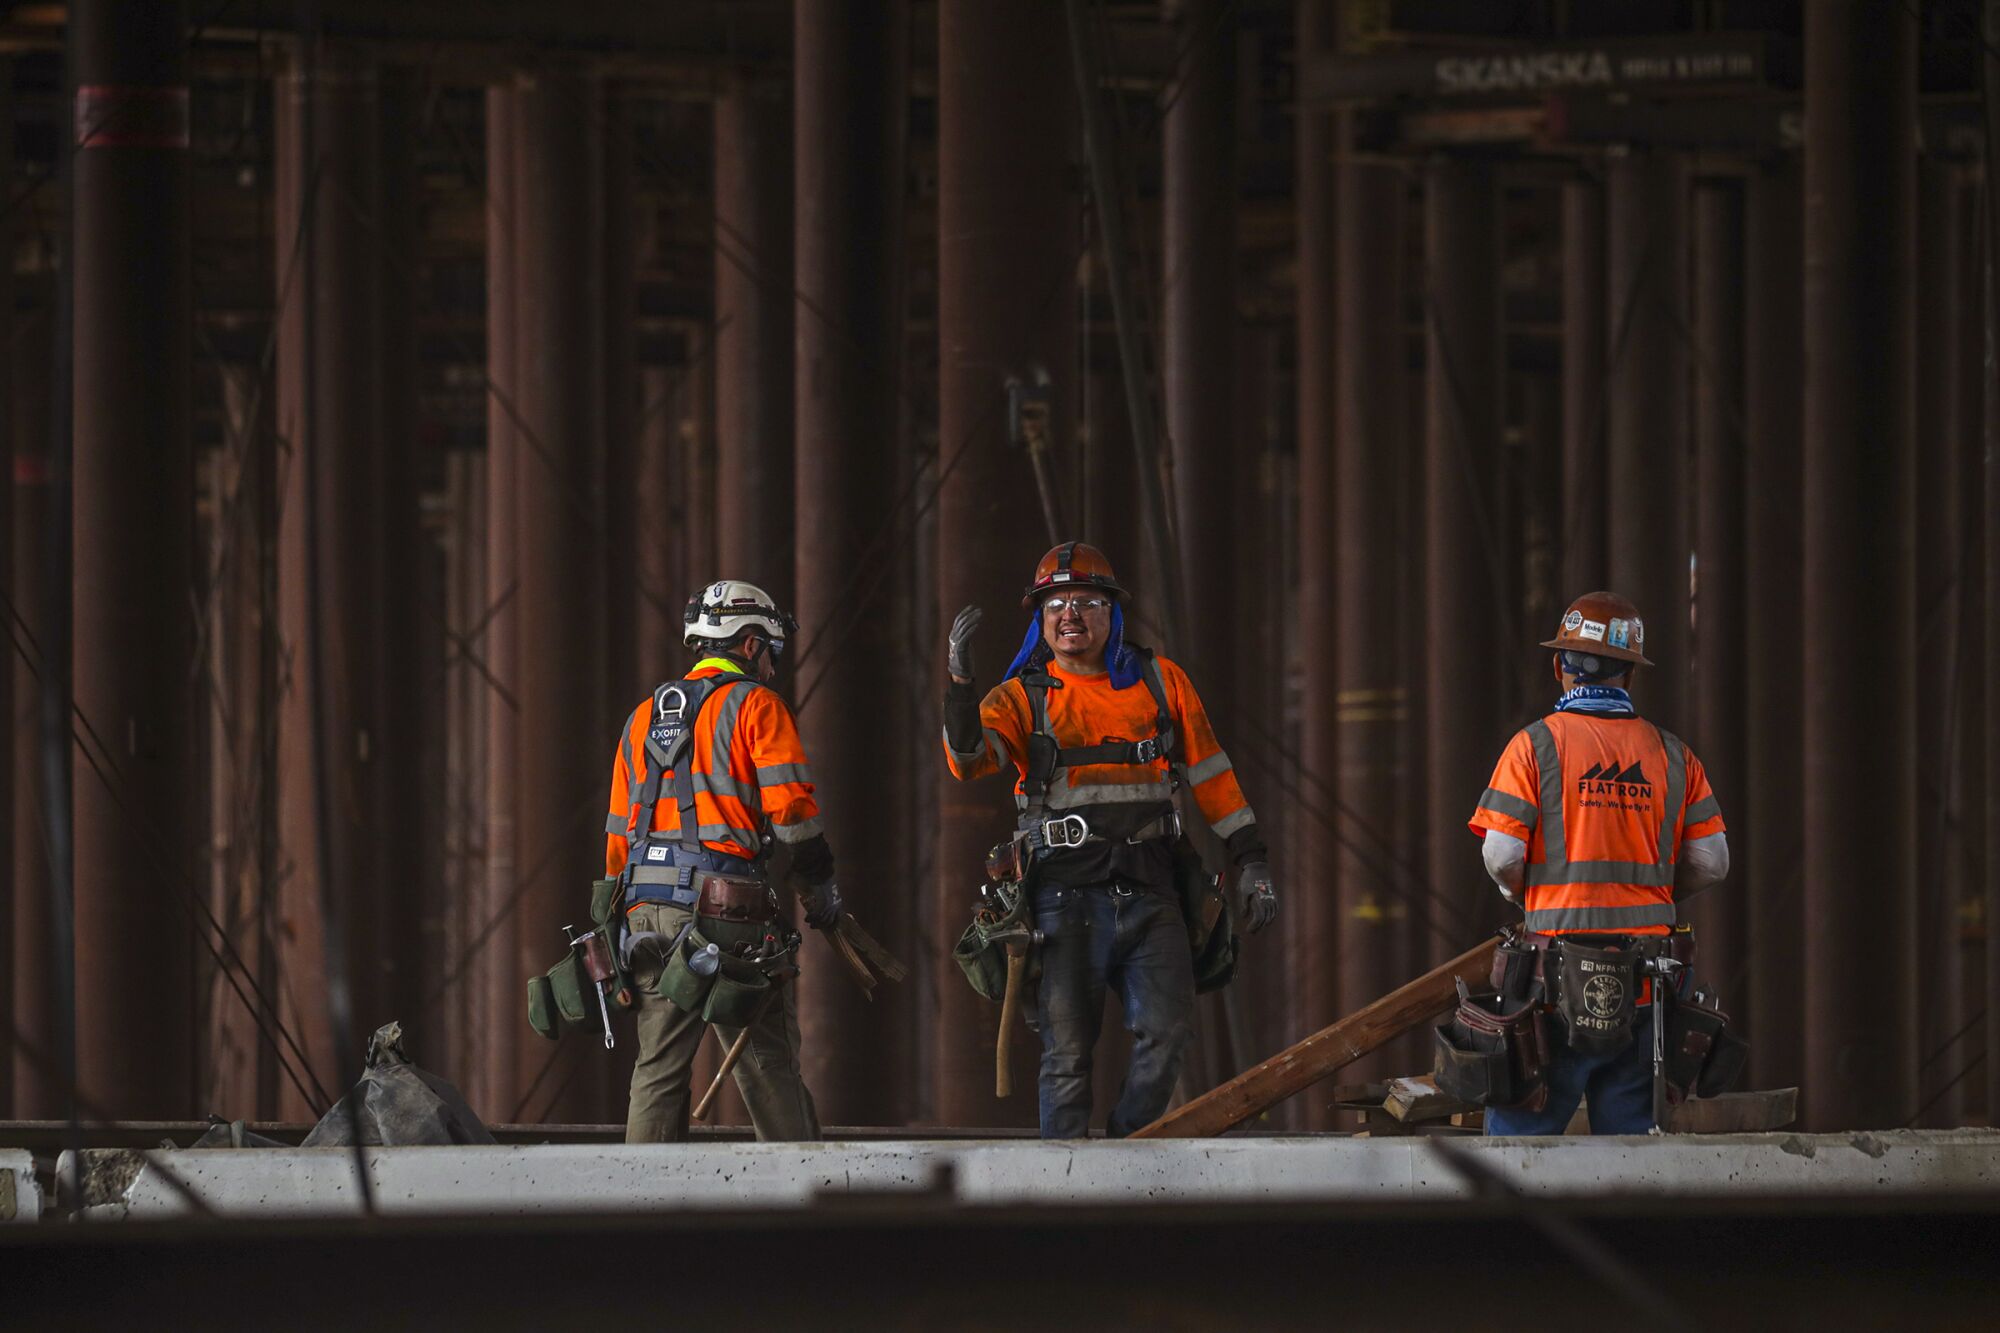 Workers are dwarfed by the massive leg beams under the bridge